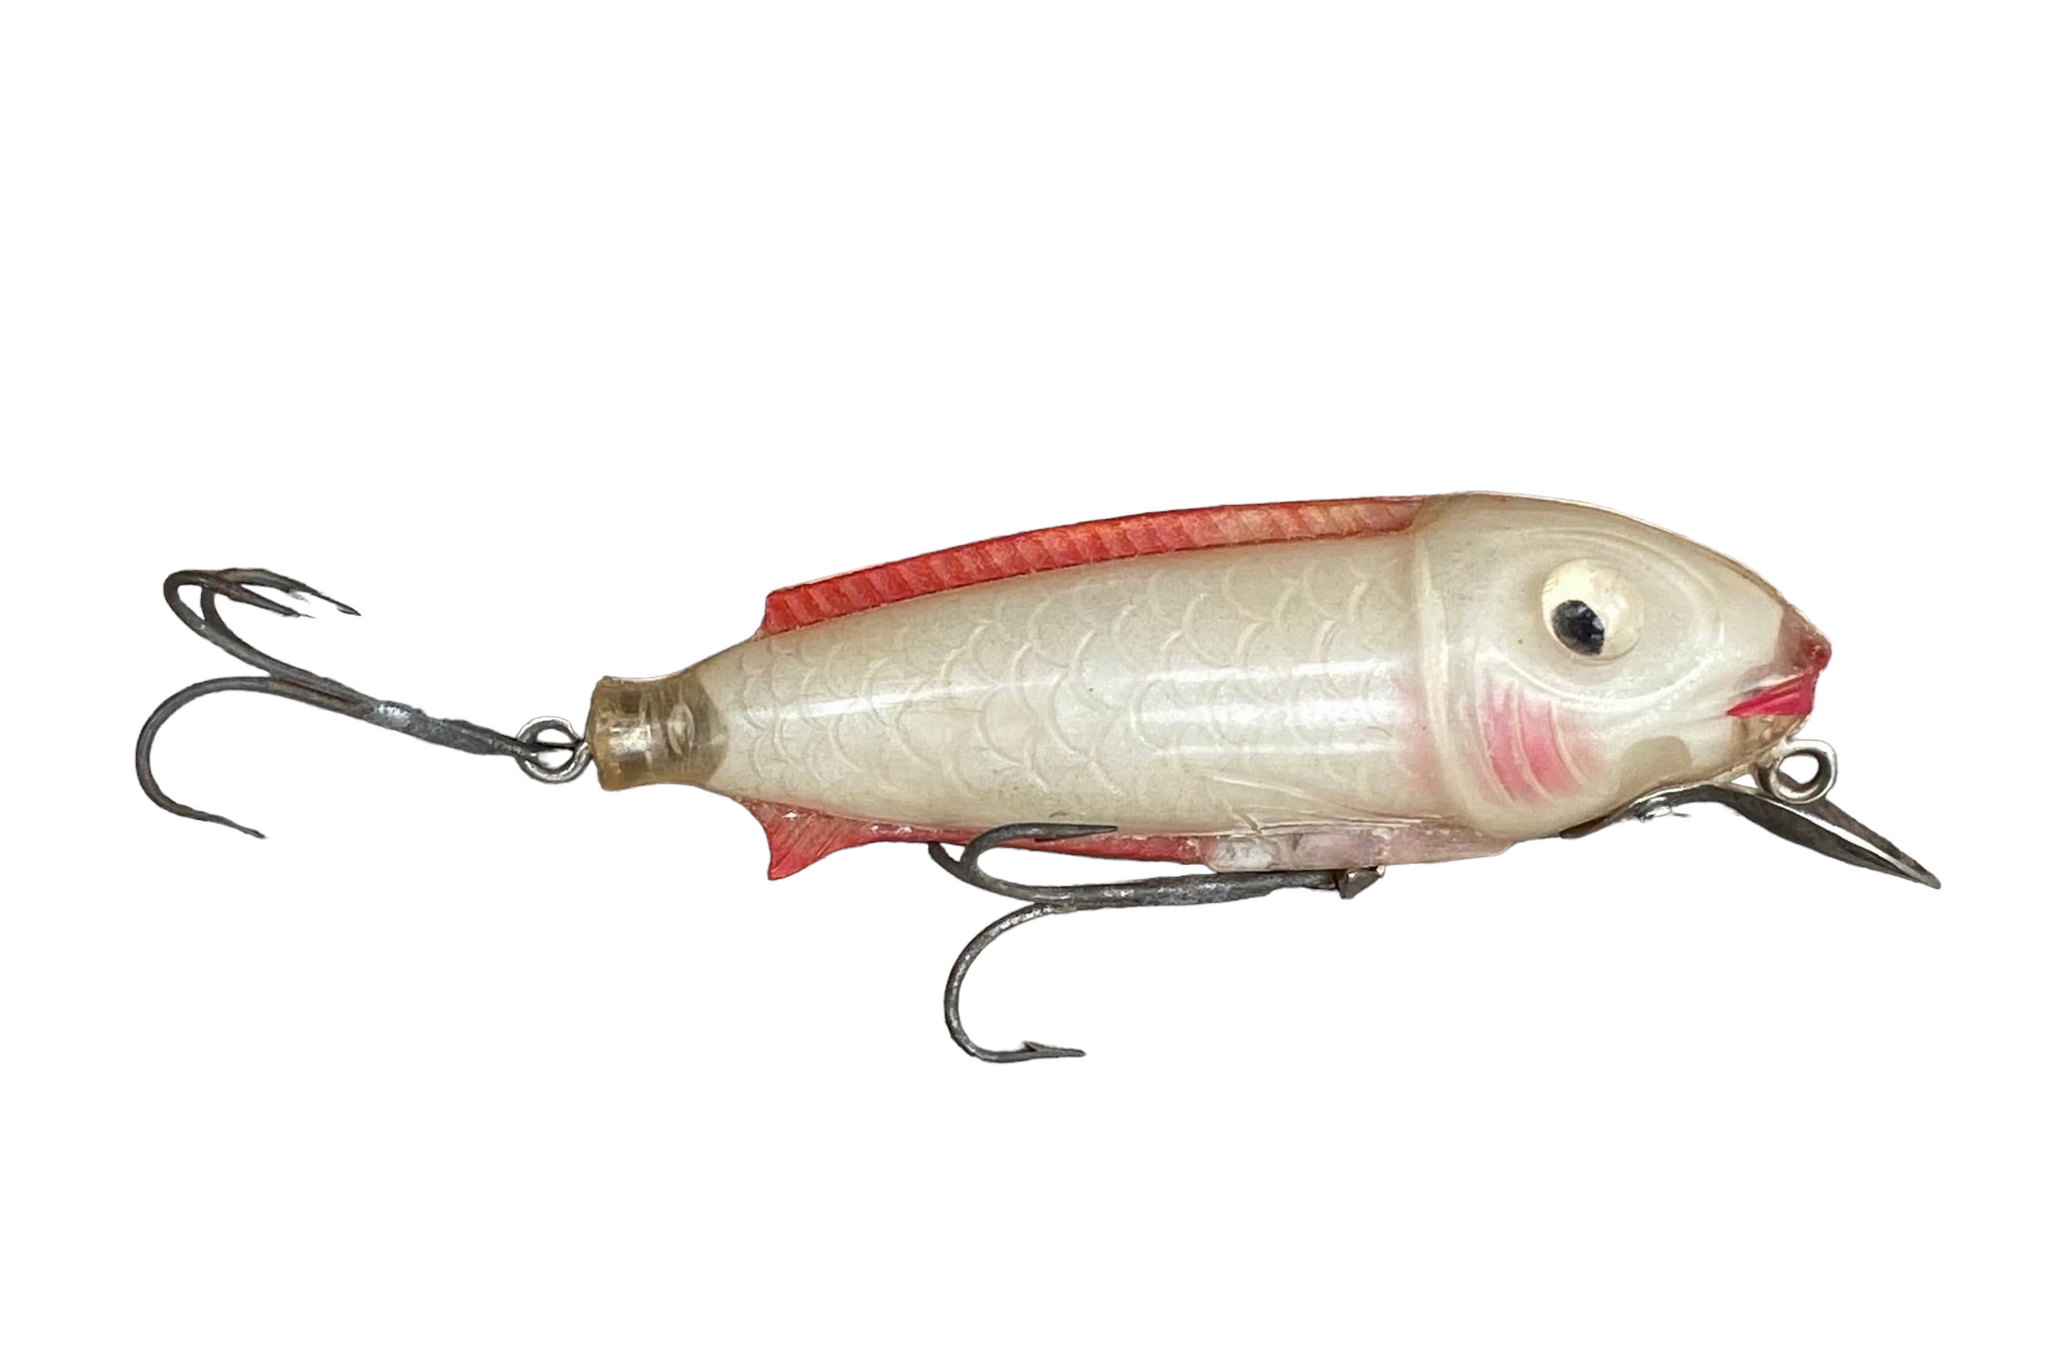 OLD DILLON BECK MANUFACTURING CO. KILLER DILLER FISHING LURE c